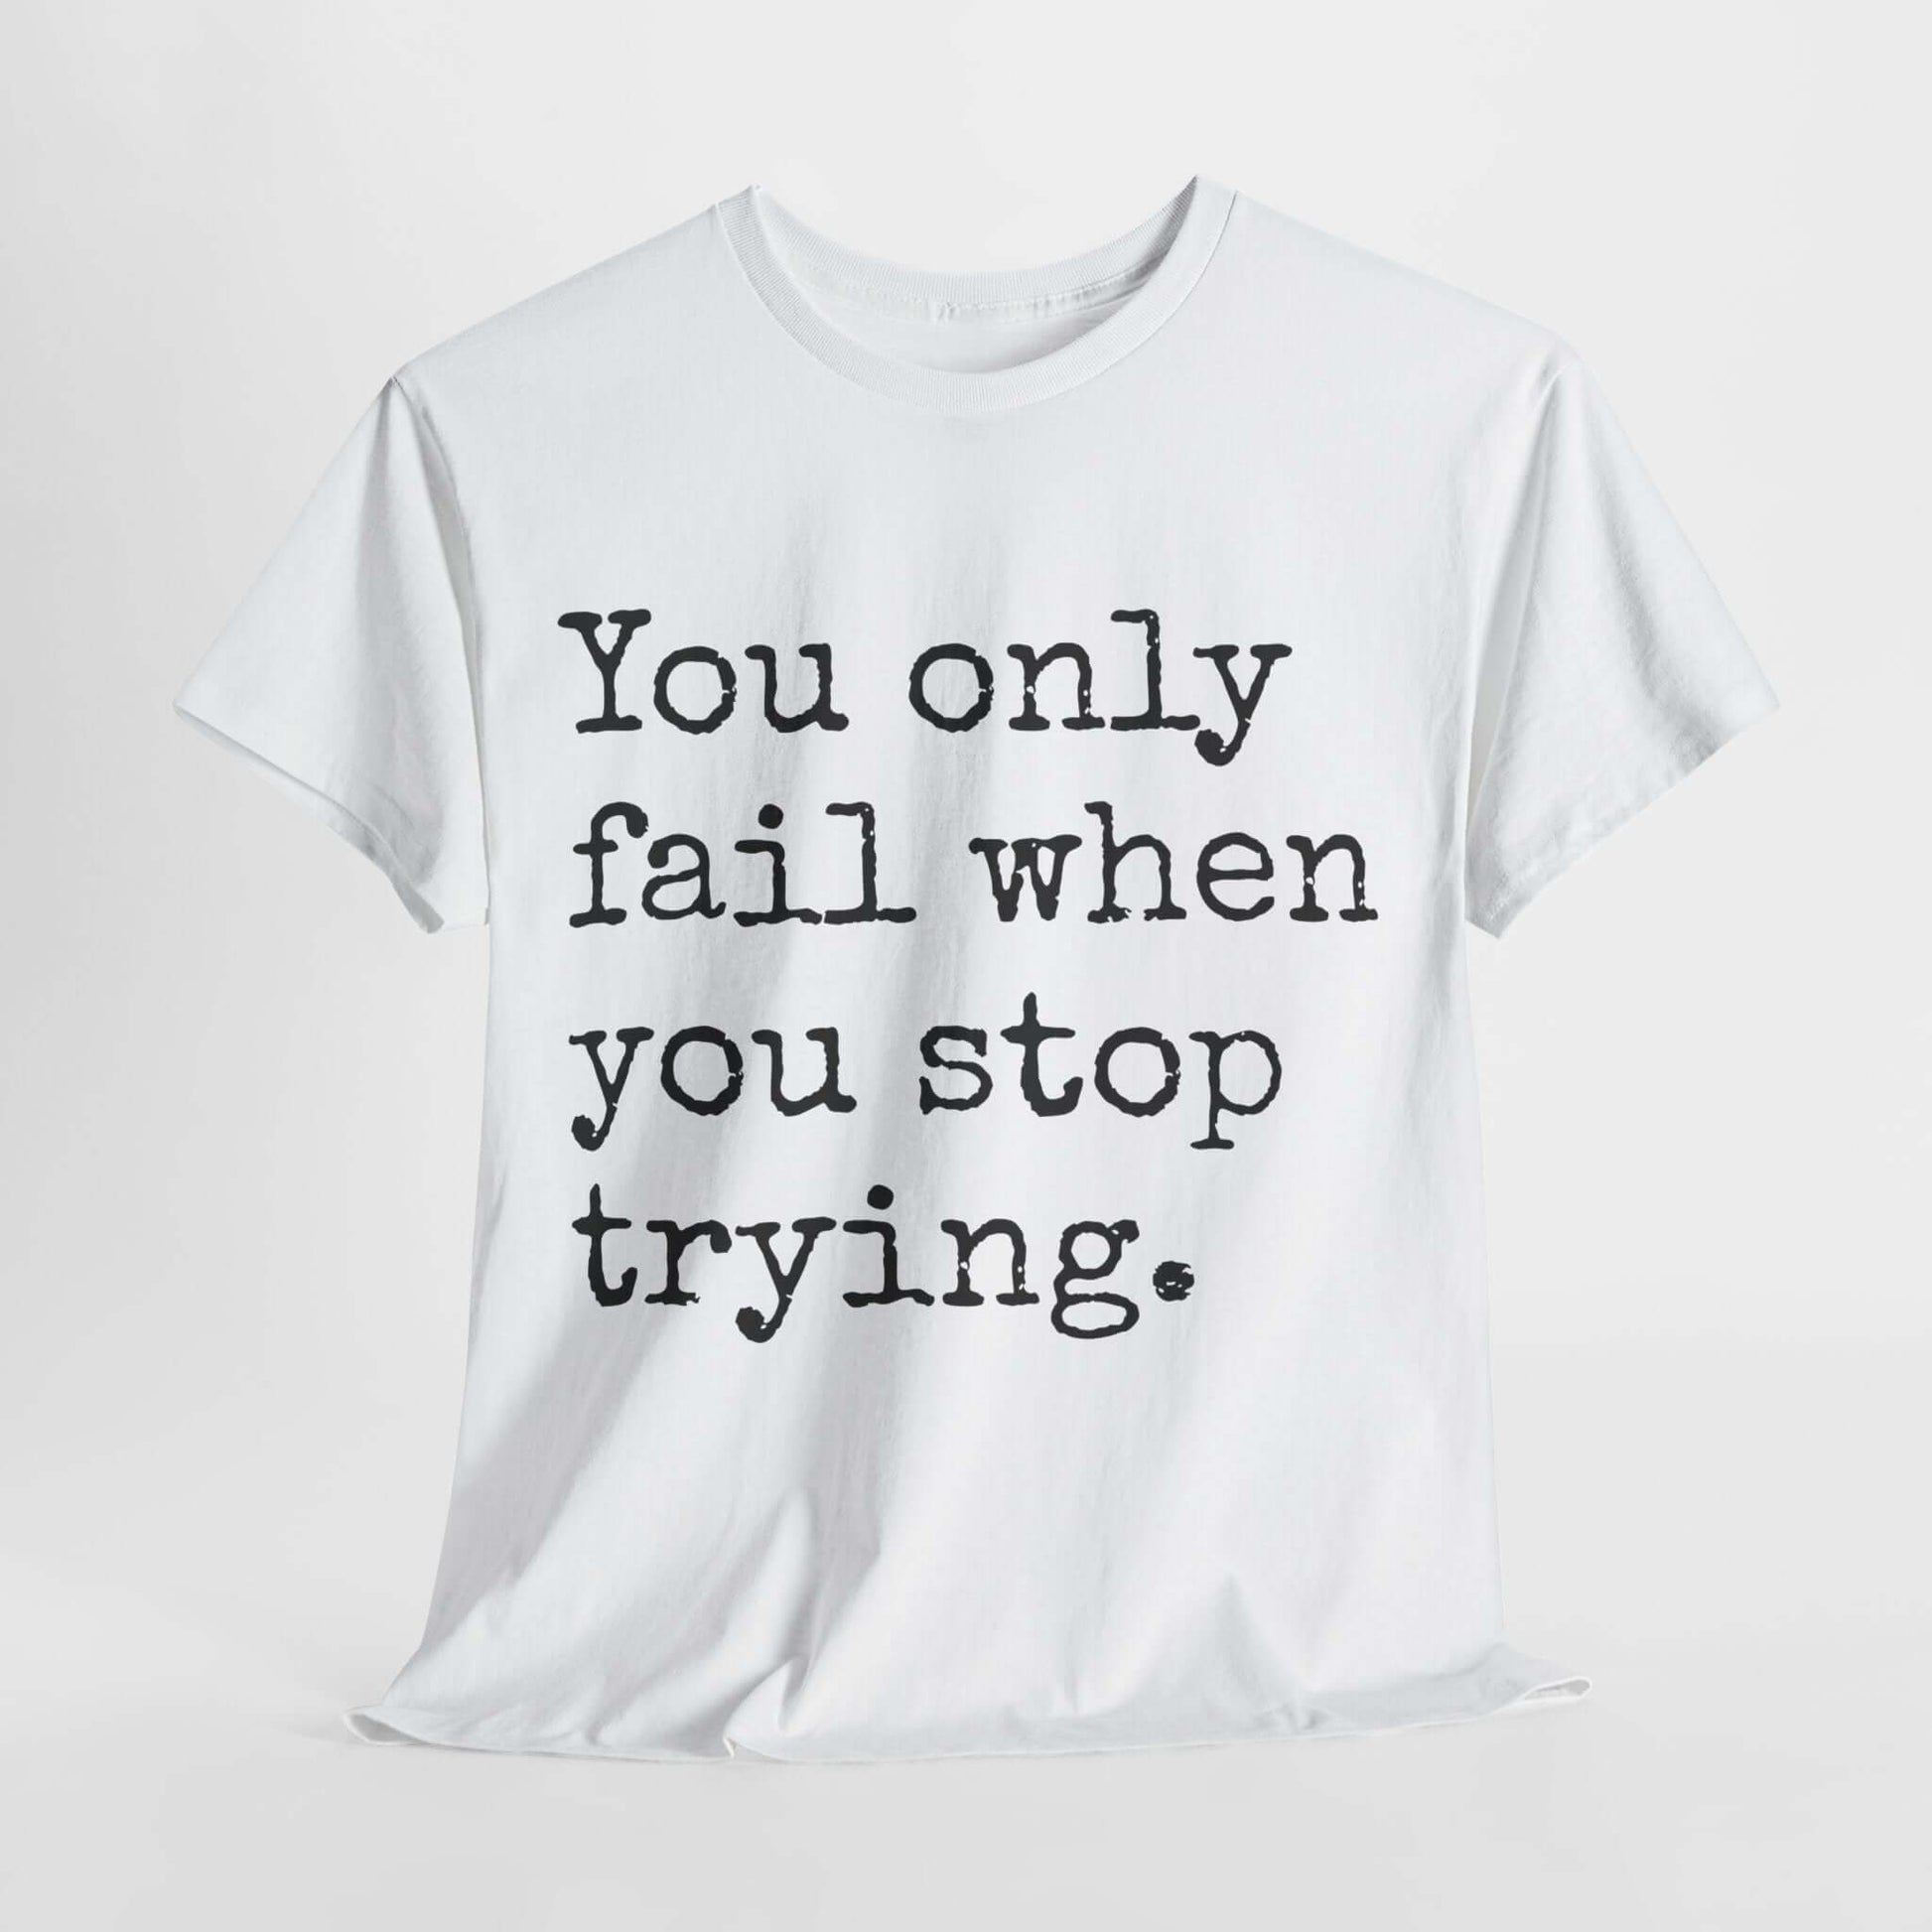 Inspirational T shirt | You only fail when you stop trying